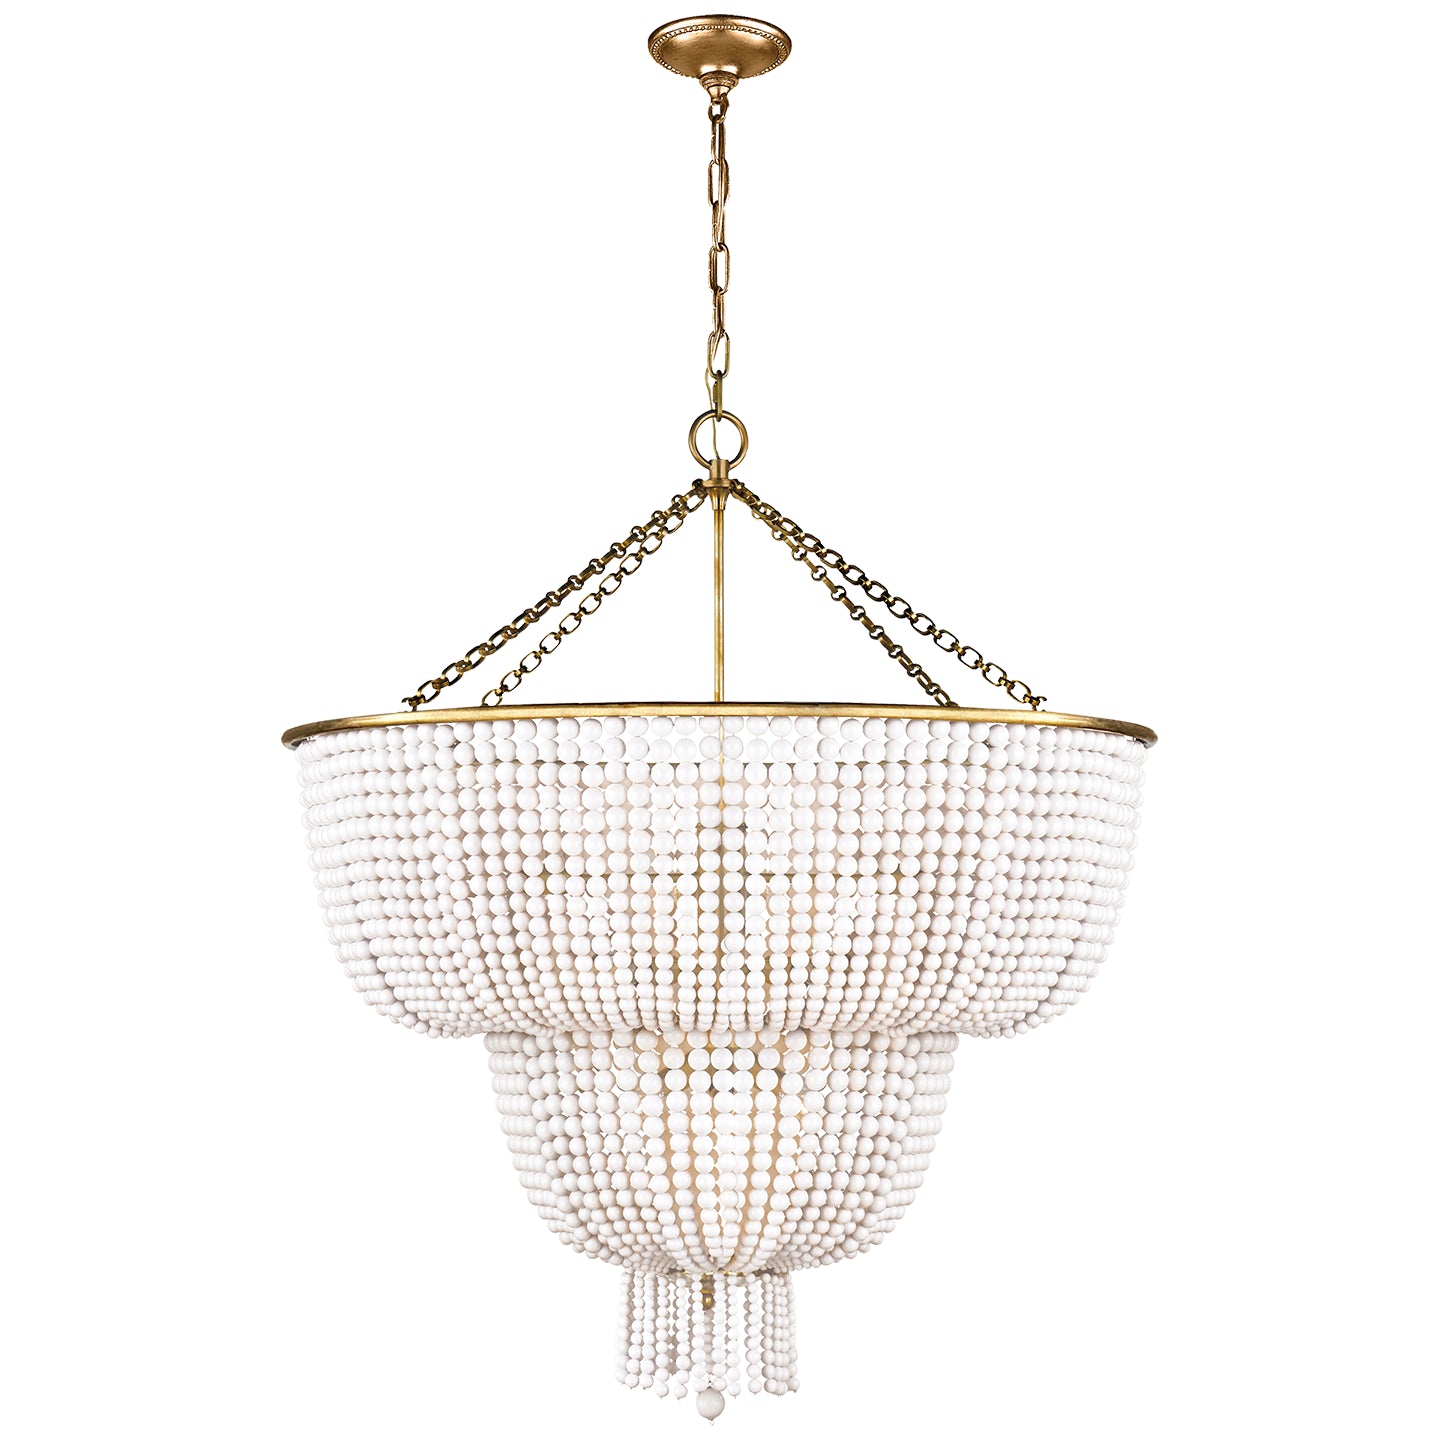 Load image into Gallery viewer, Visual Comfort Signature - ARN 5104HAB-WG - 12 Light Chandelier - Jacqueline - Hand-Rubbed Antique Brass
